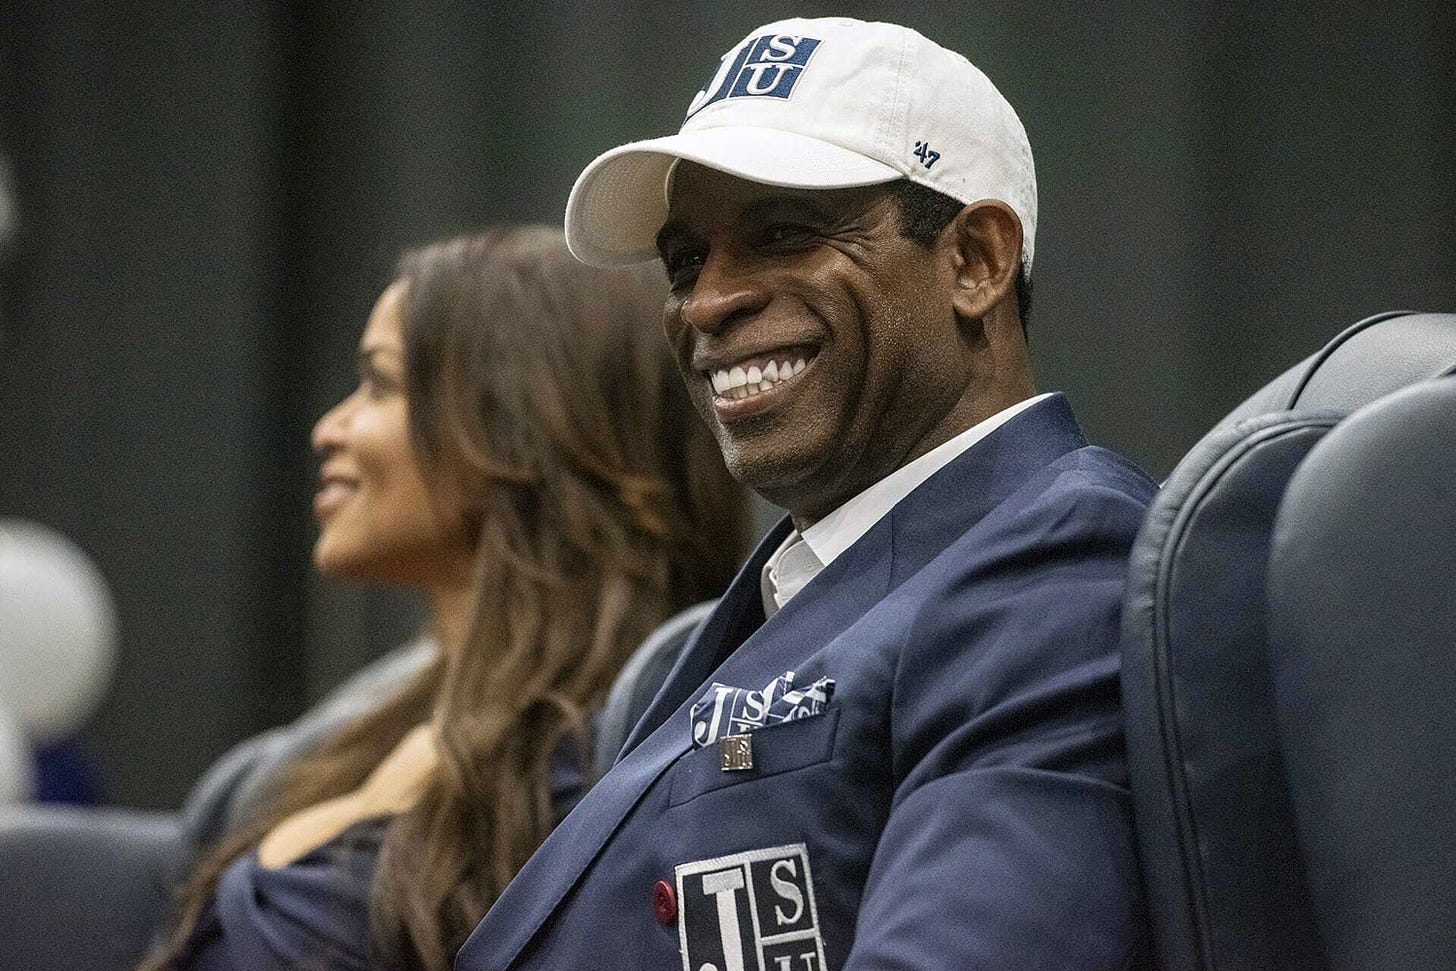 Match made in heaven': Deion Sanders to coach Jackson State